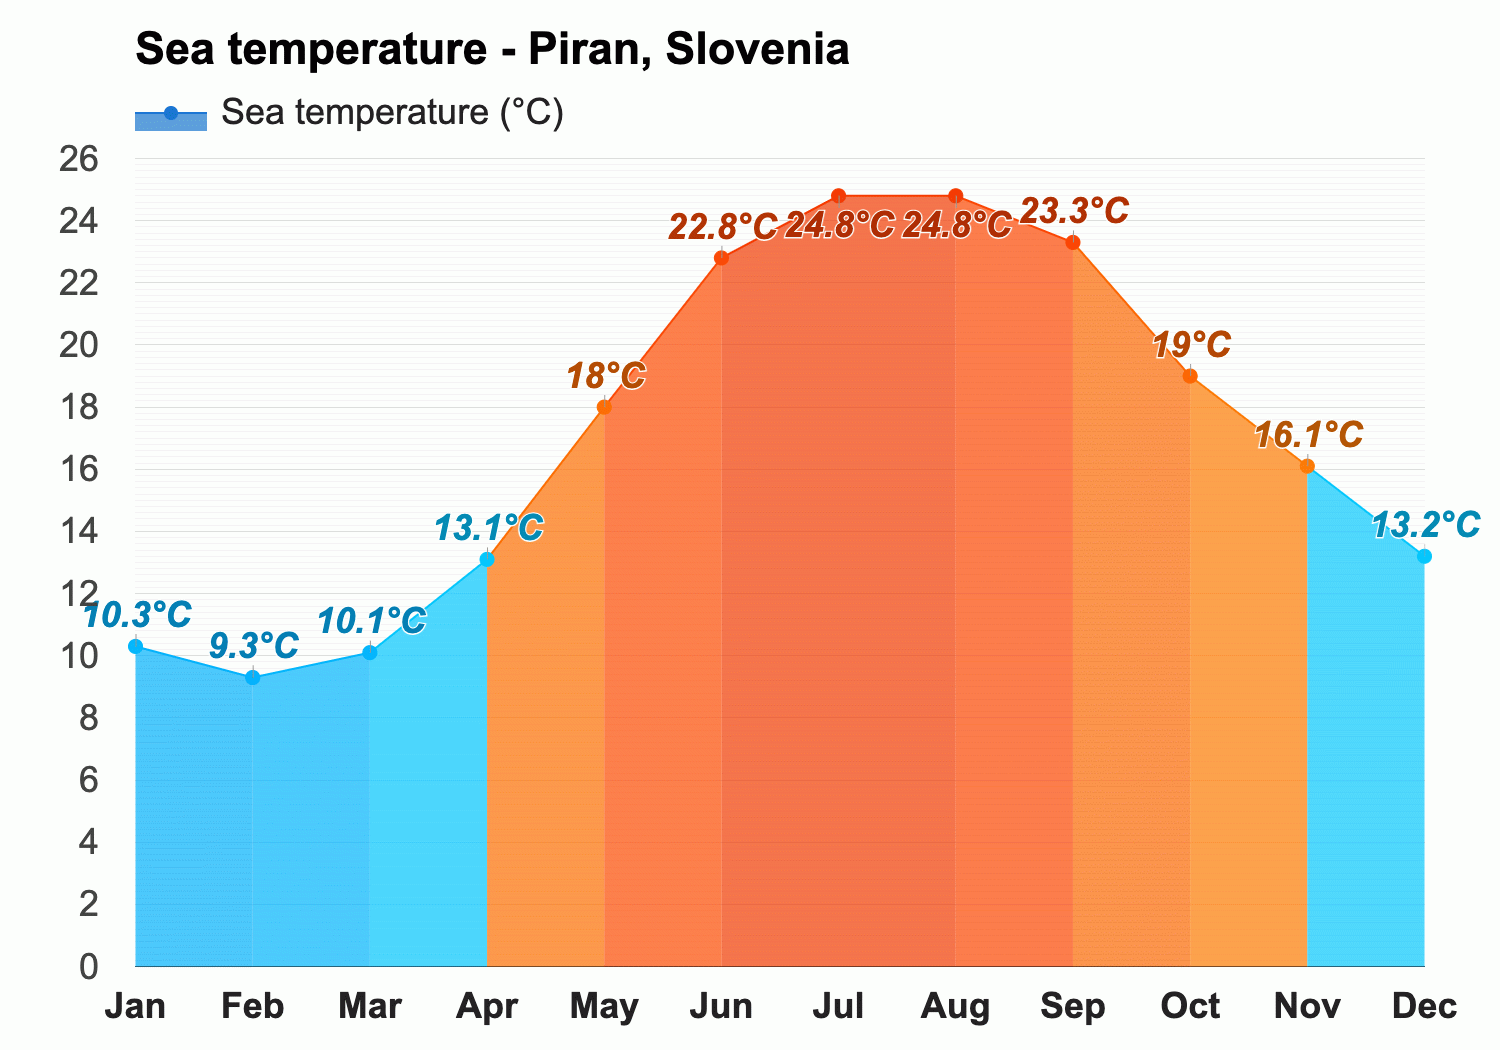 Piran, Slovenia - Climate & Monthly weather forecast